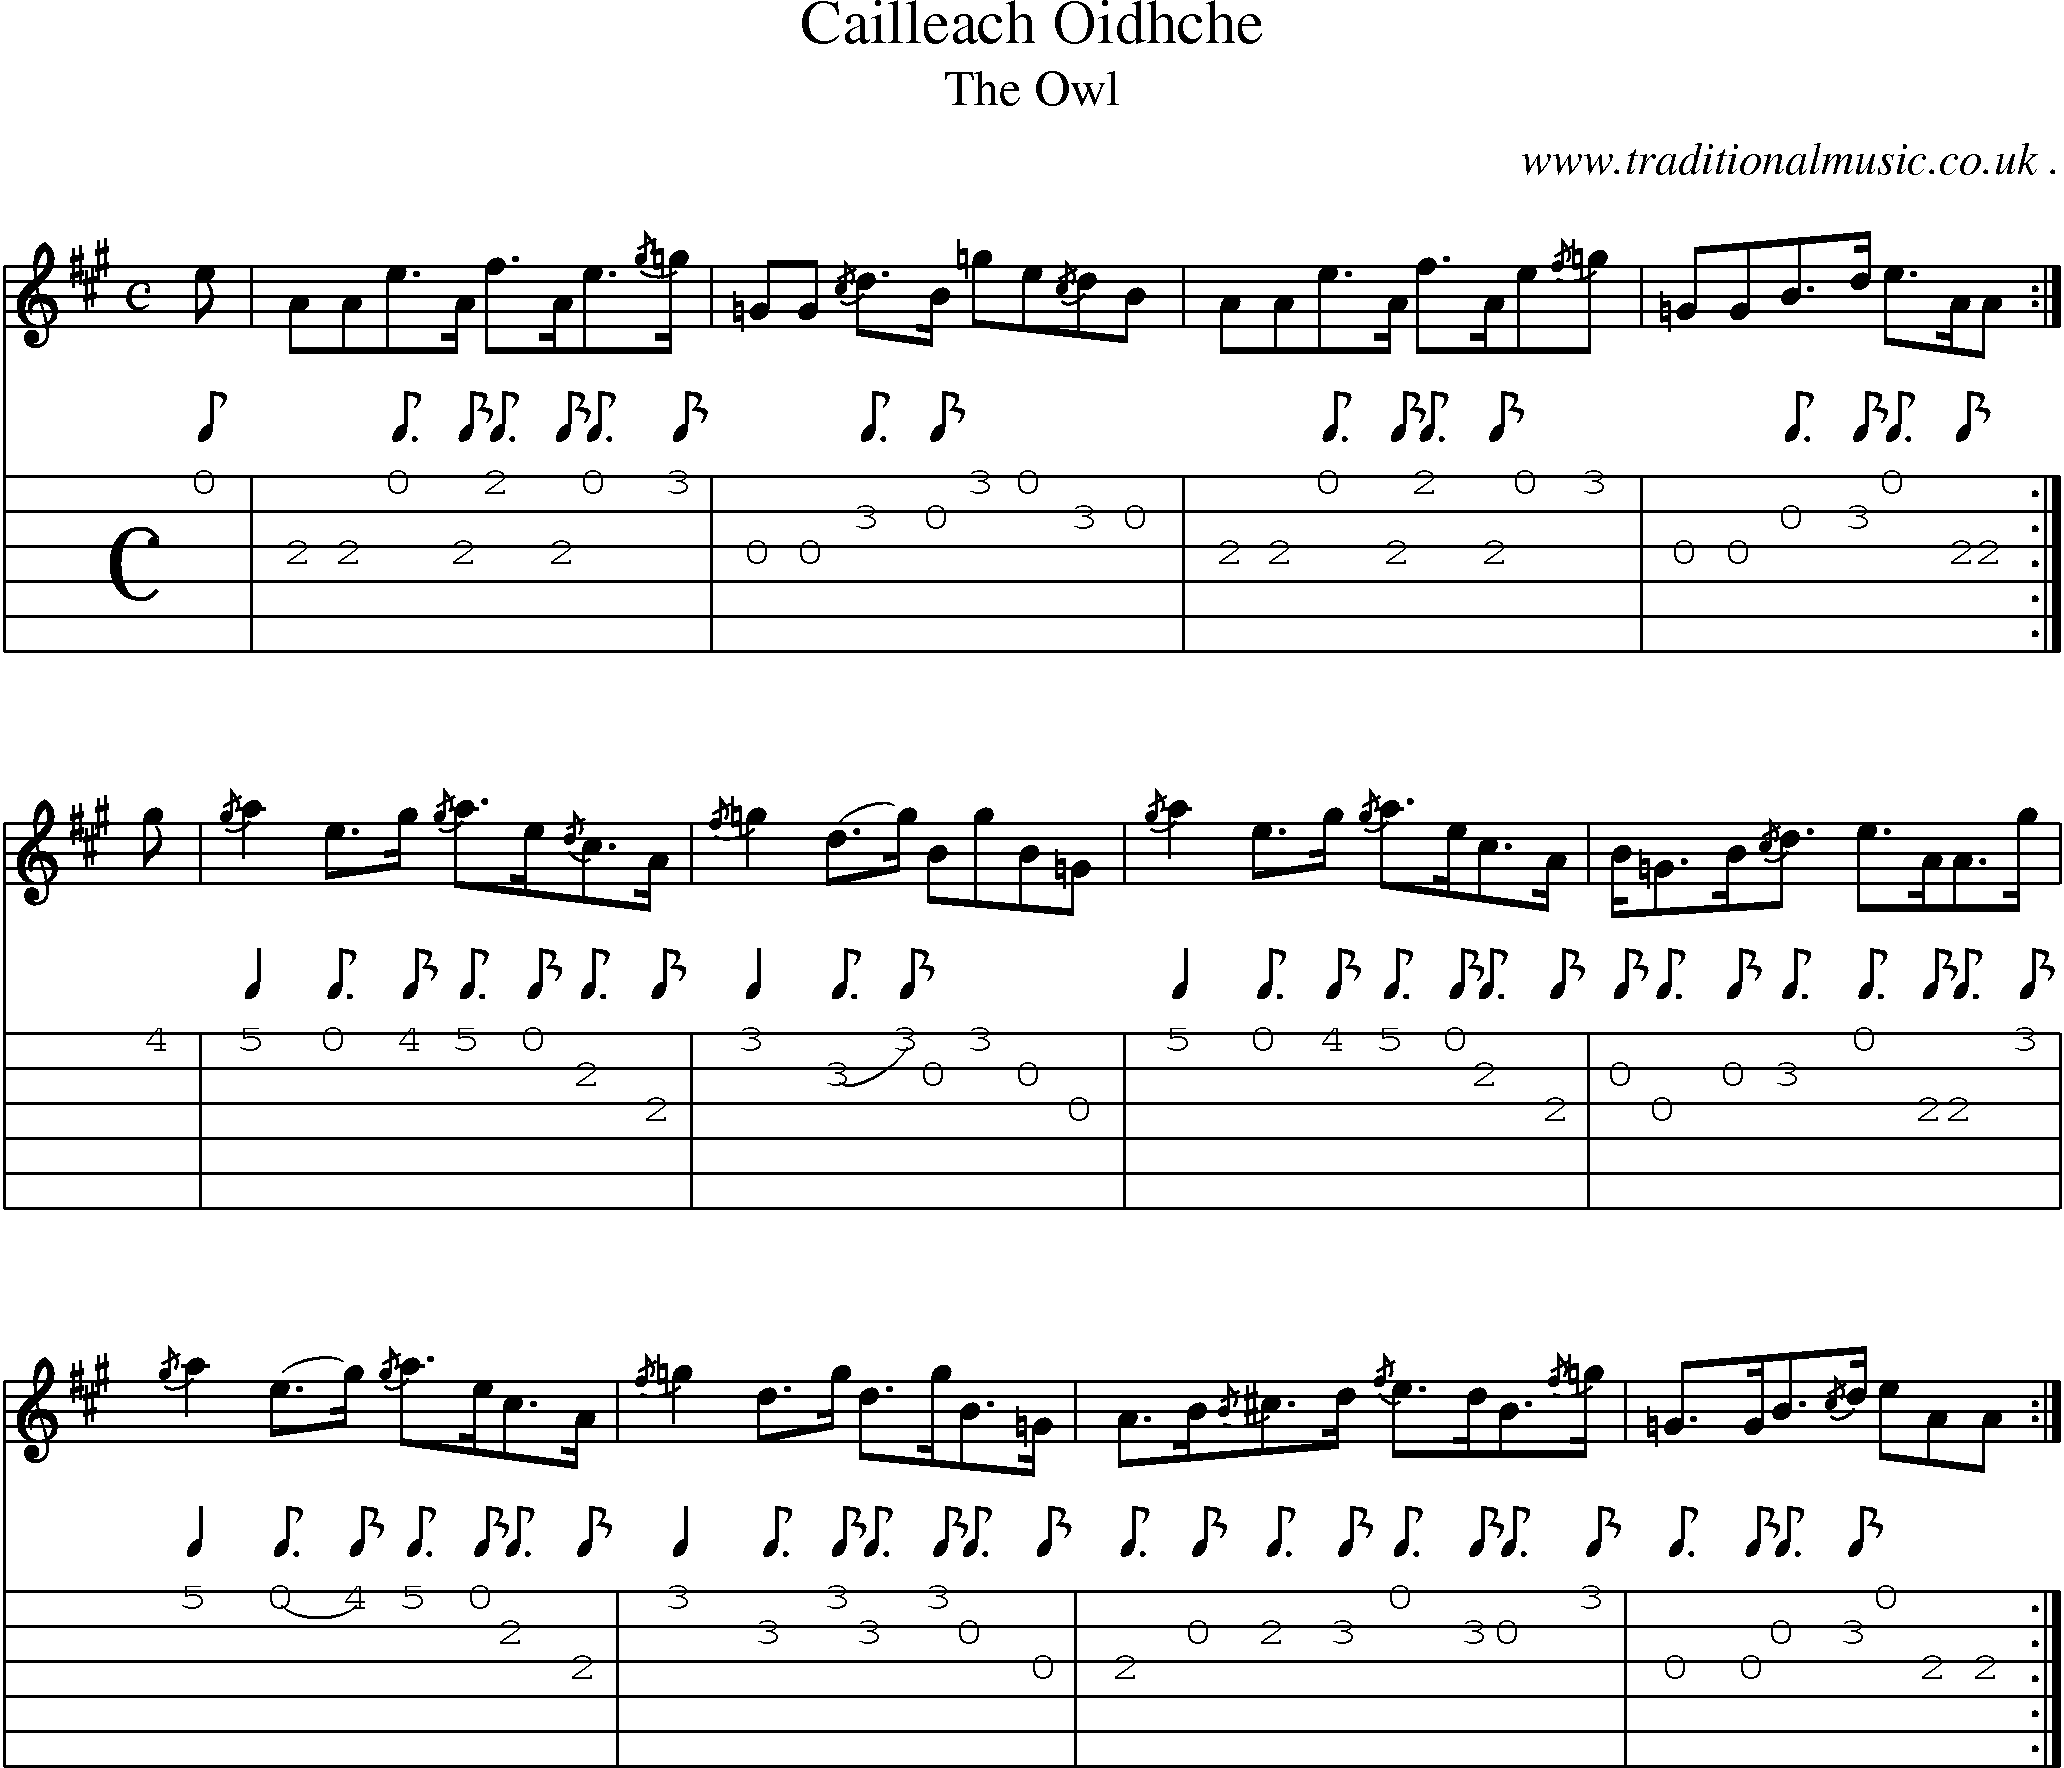 Sheet-music  score, Chords and Guitar Tabs for Cailleach Oidhche